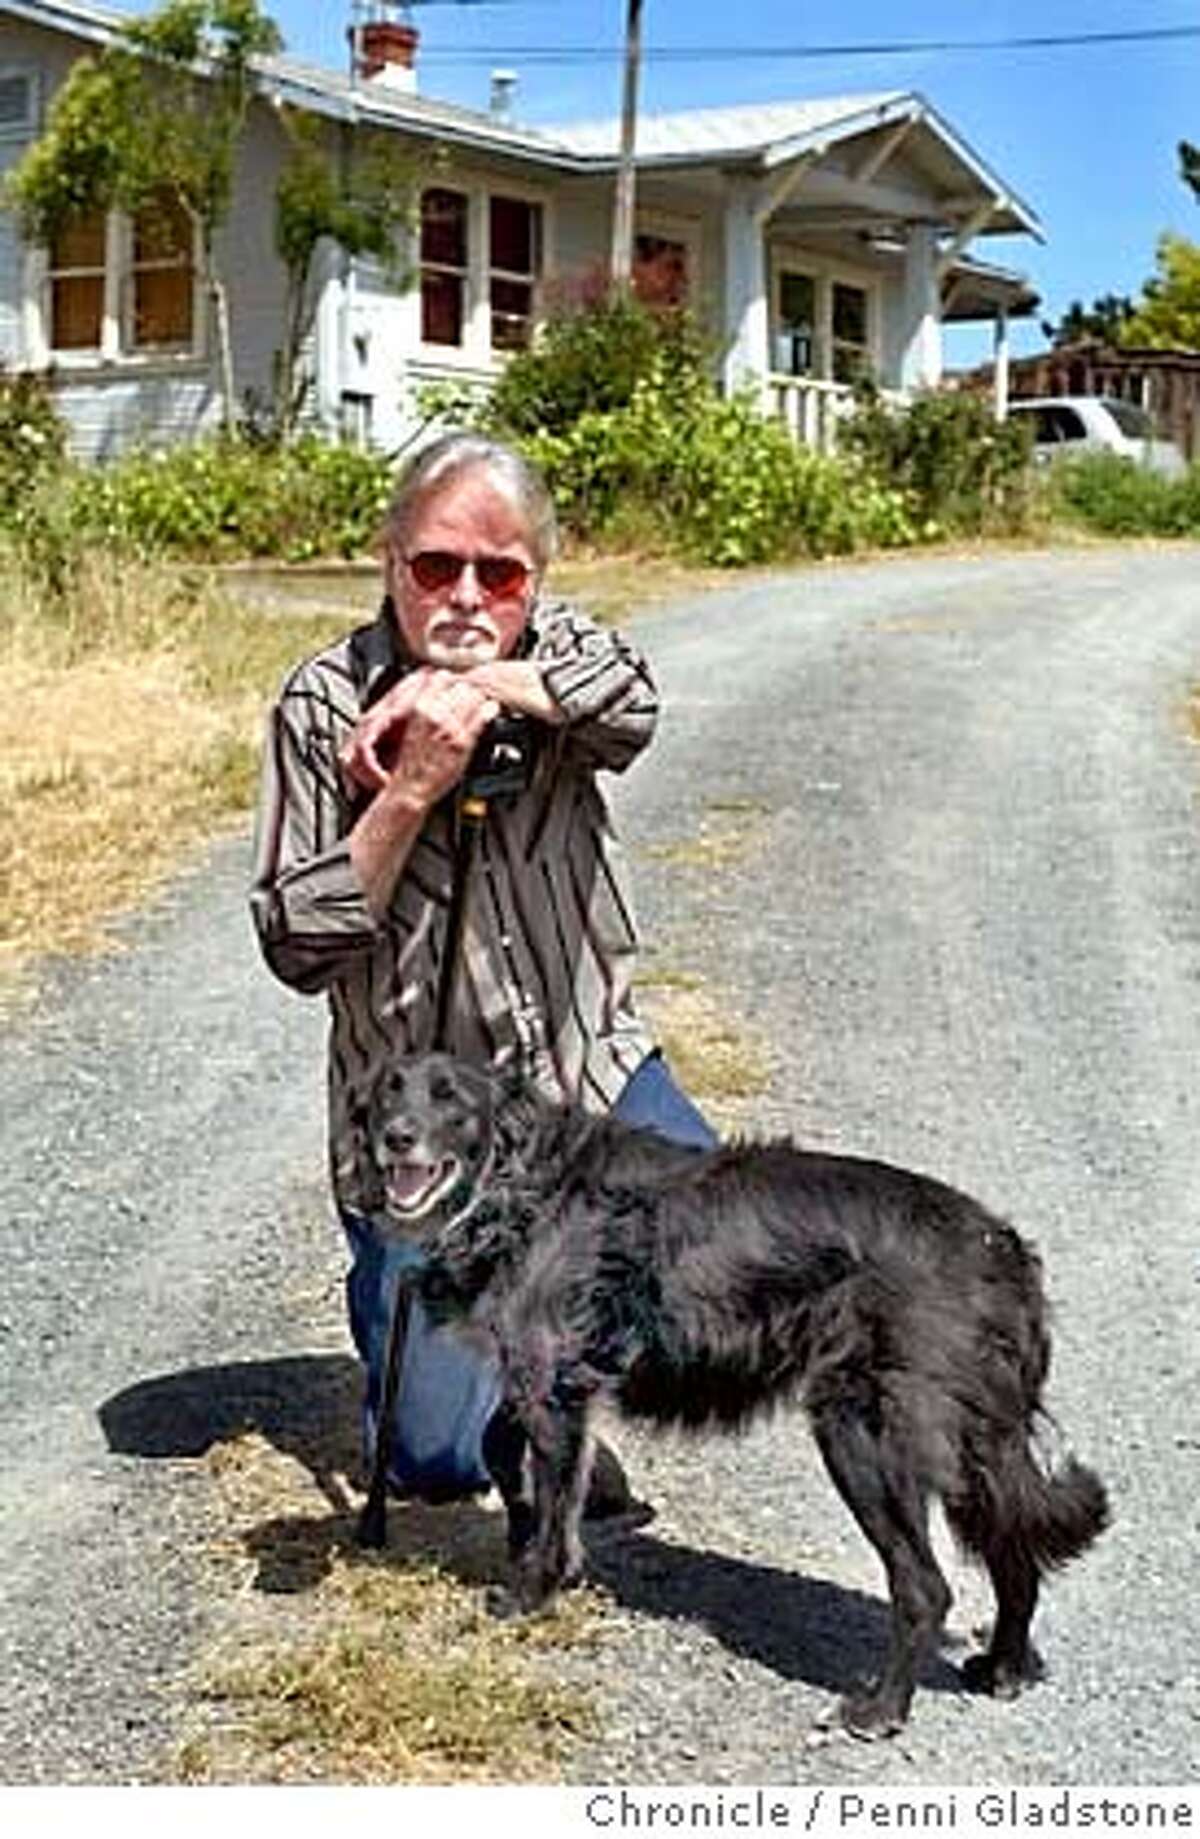 Dryden in front of his home with his landlords dog which he cares for during the day. Jefferson Airplane drummer Spencer Dryden has fallen on hard times. His health is failing. He doesn't have any dough and his house burned down with all his earthly possessions. A benefit is being held on his belaf 5-22 at Slim's on 5/13/04 in Penngrove, CA. must credit photo by Penni Gladstone/